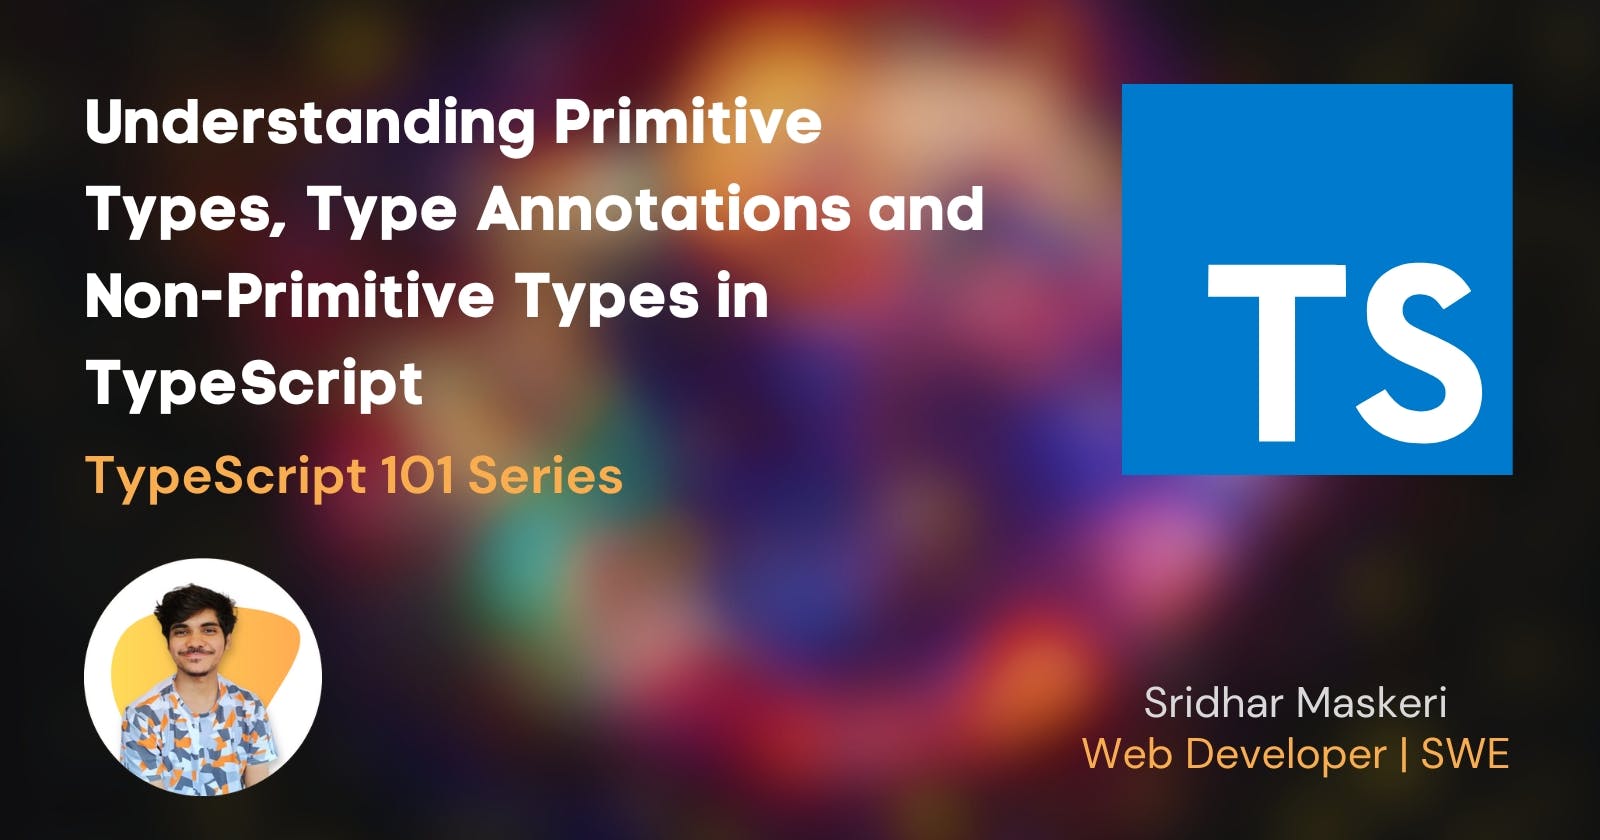 Understanding Primitive Types, Type Annotations and Non-Primitive Types in TypeScript